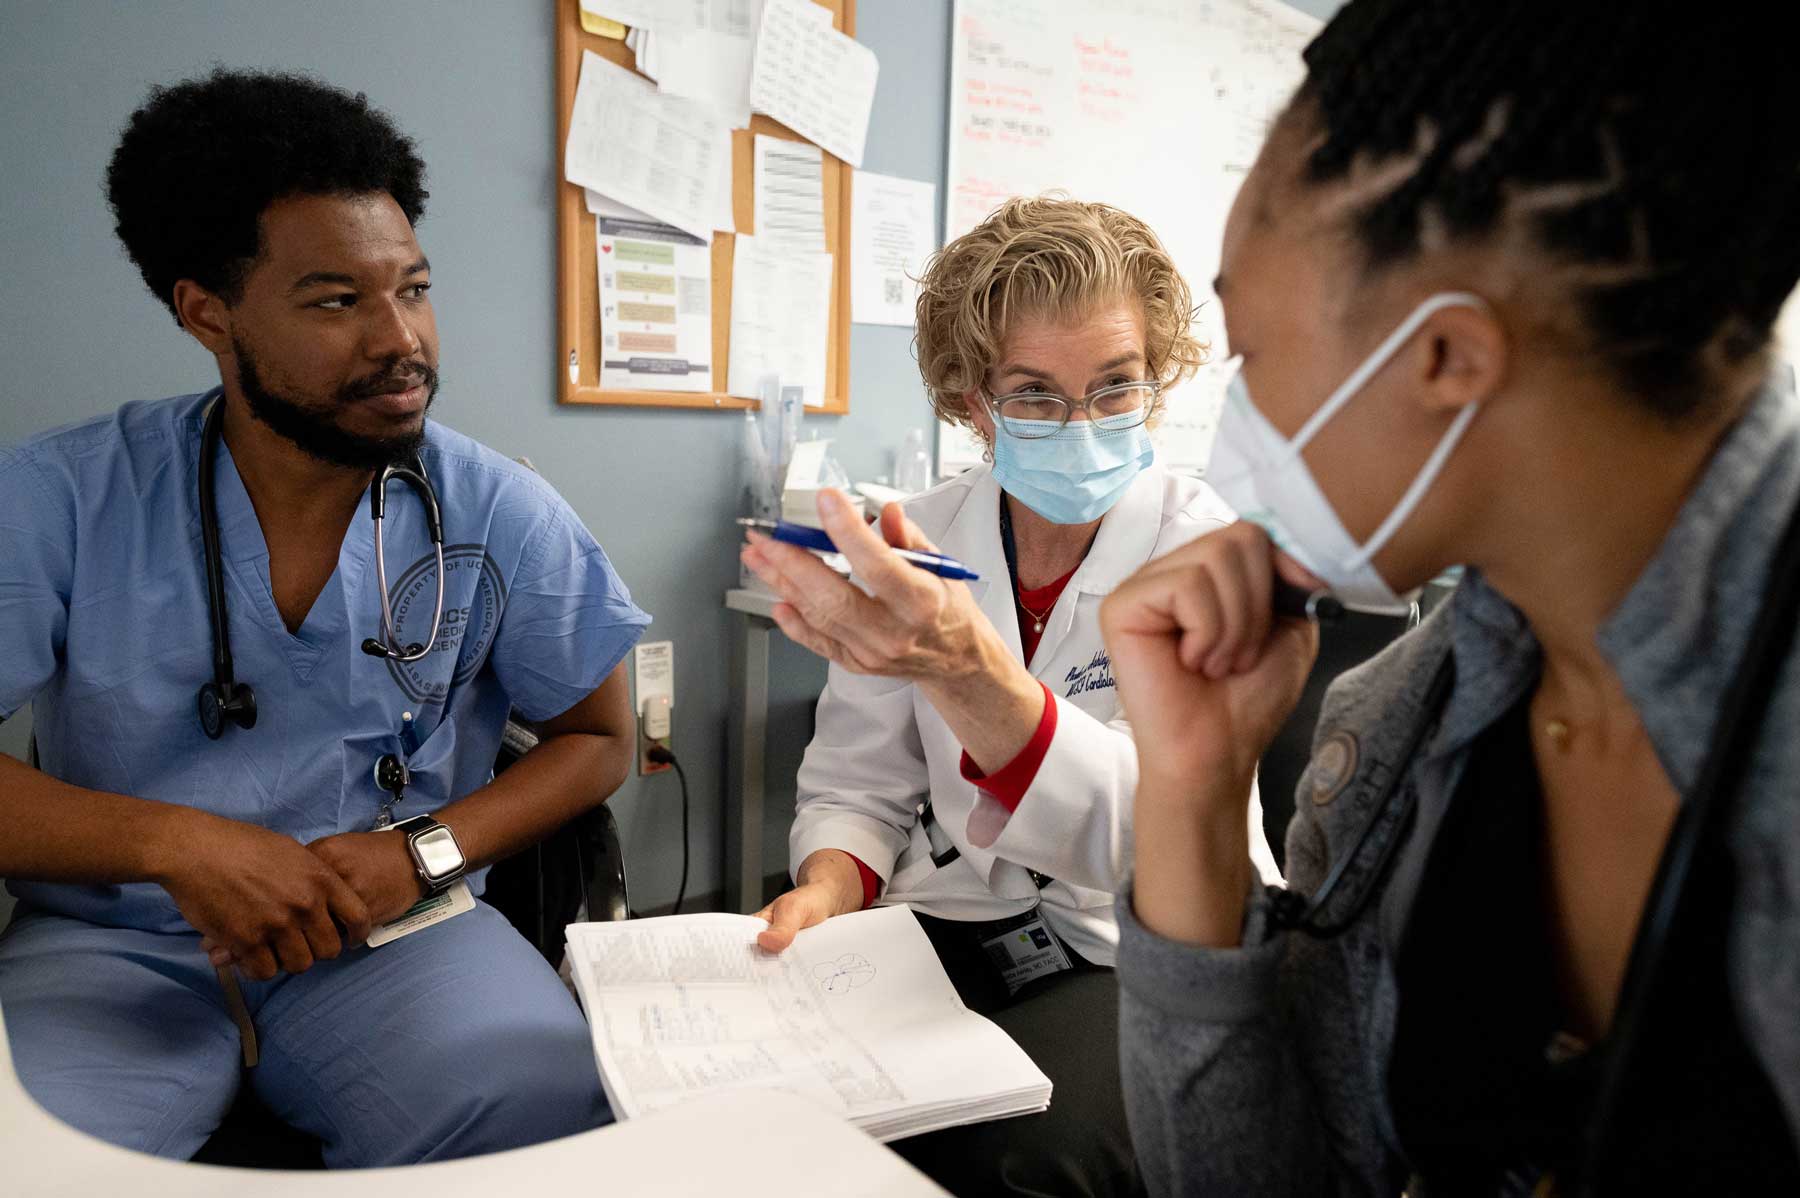 Senior resident Chris (left) and first-year resident (Kelechi) discuss a patient with a doctor (center).